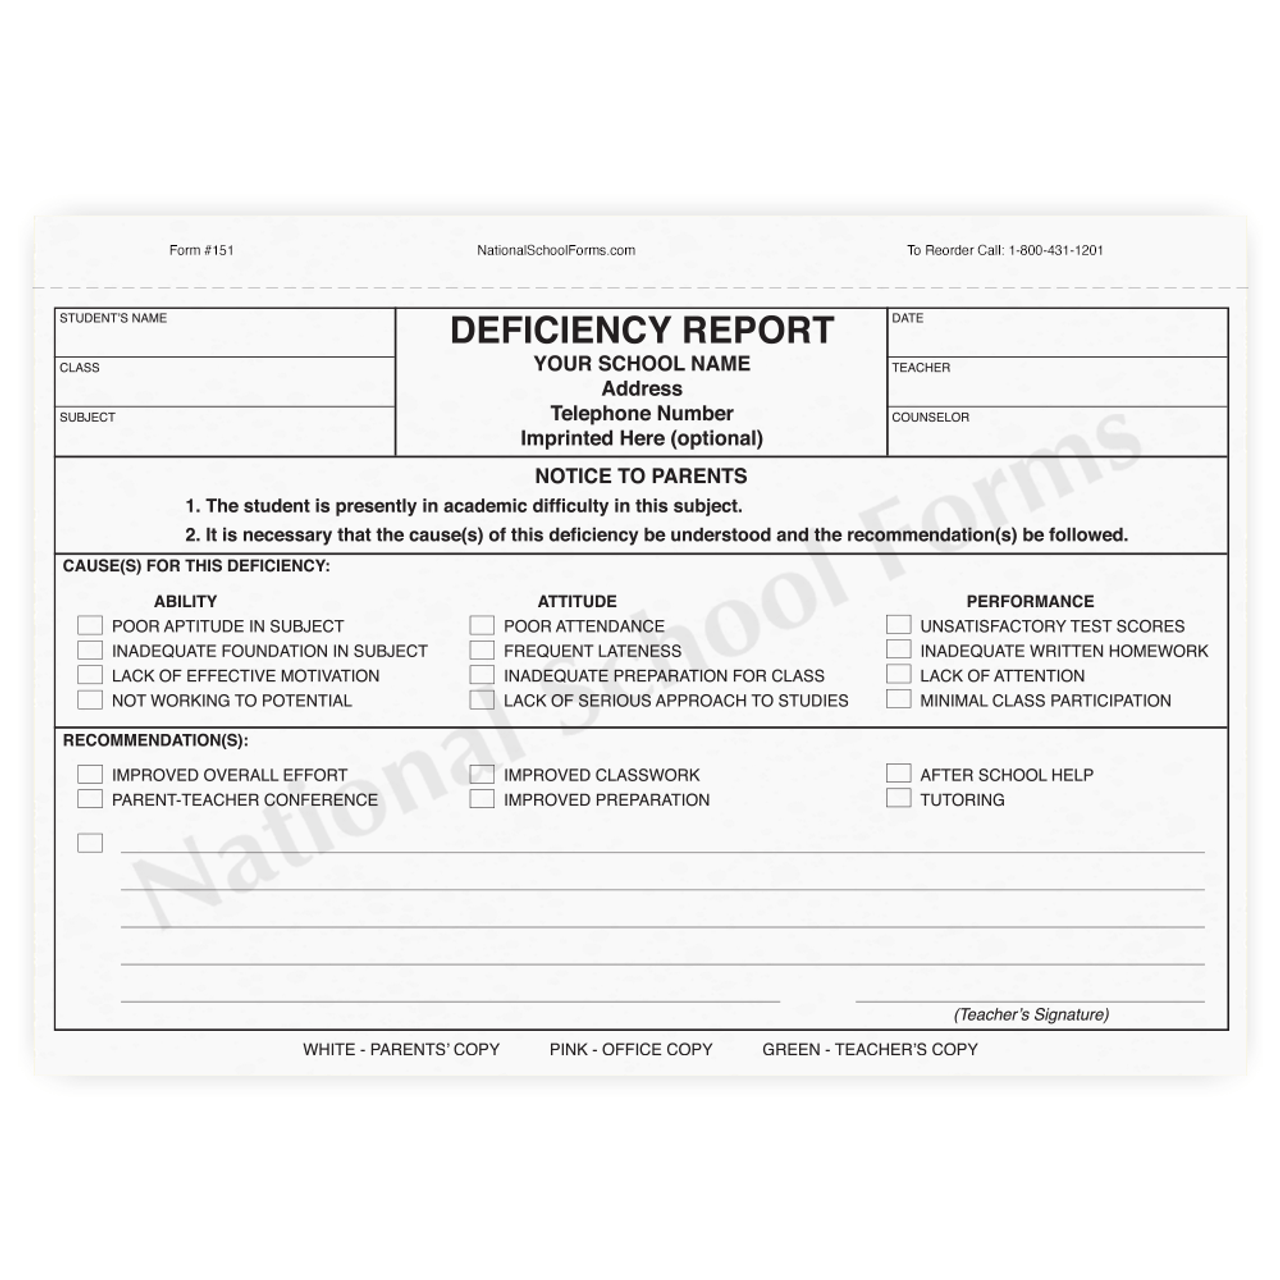 a report issued on significant deficiencies